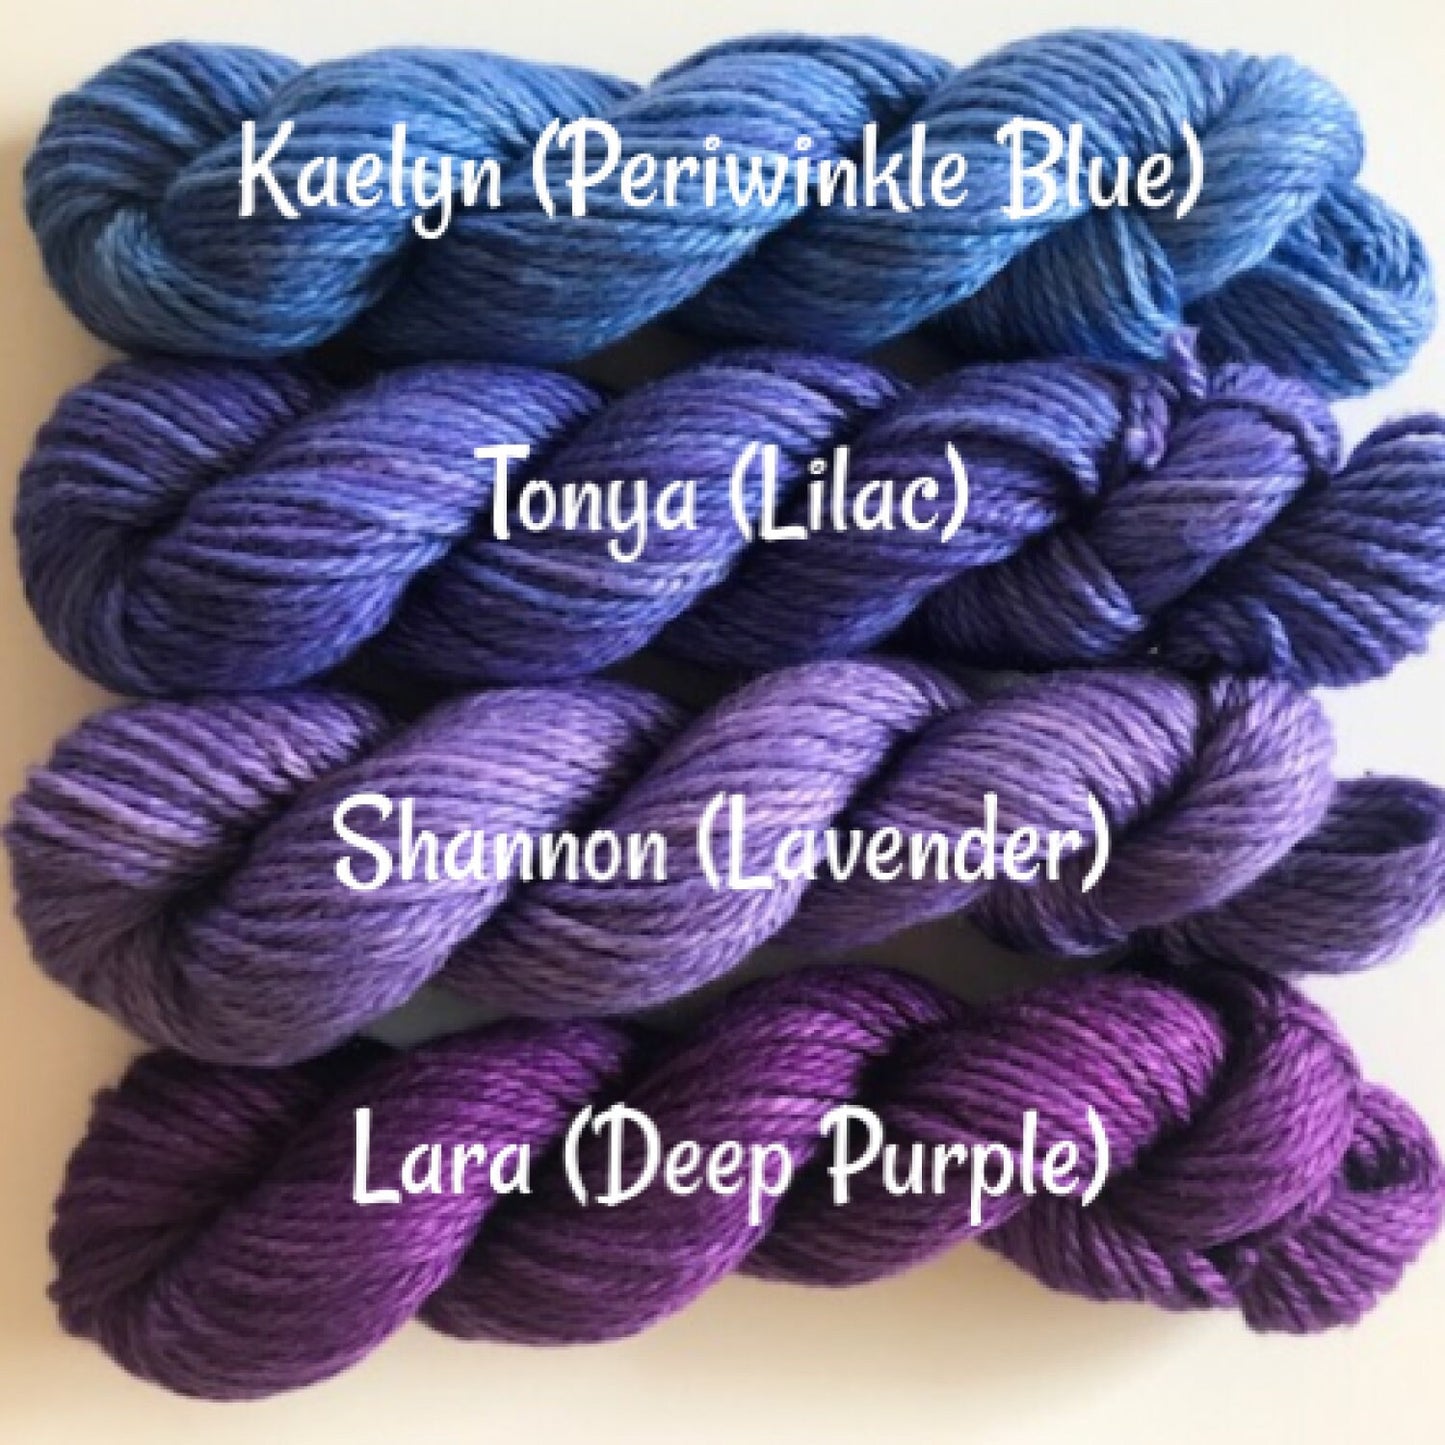 Hand Dyed Yarn 10 Color Mini Skein Kit - Vegan Fiber - DK Light Worsted - 3 Ply Soft Baby Yarn - Bamboo Cotton Semisolid - (10) 53 Yd Skeins